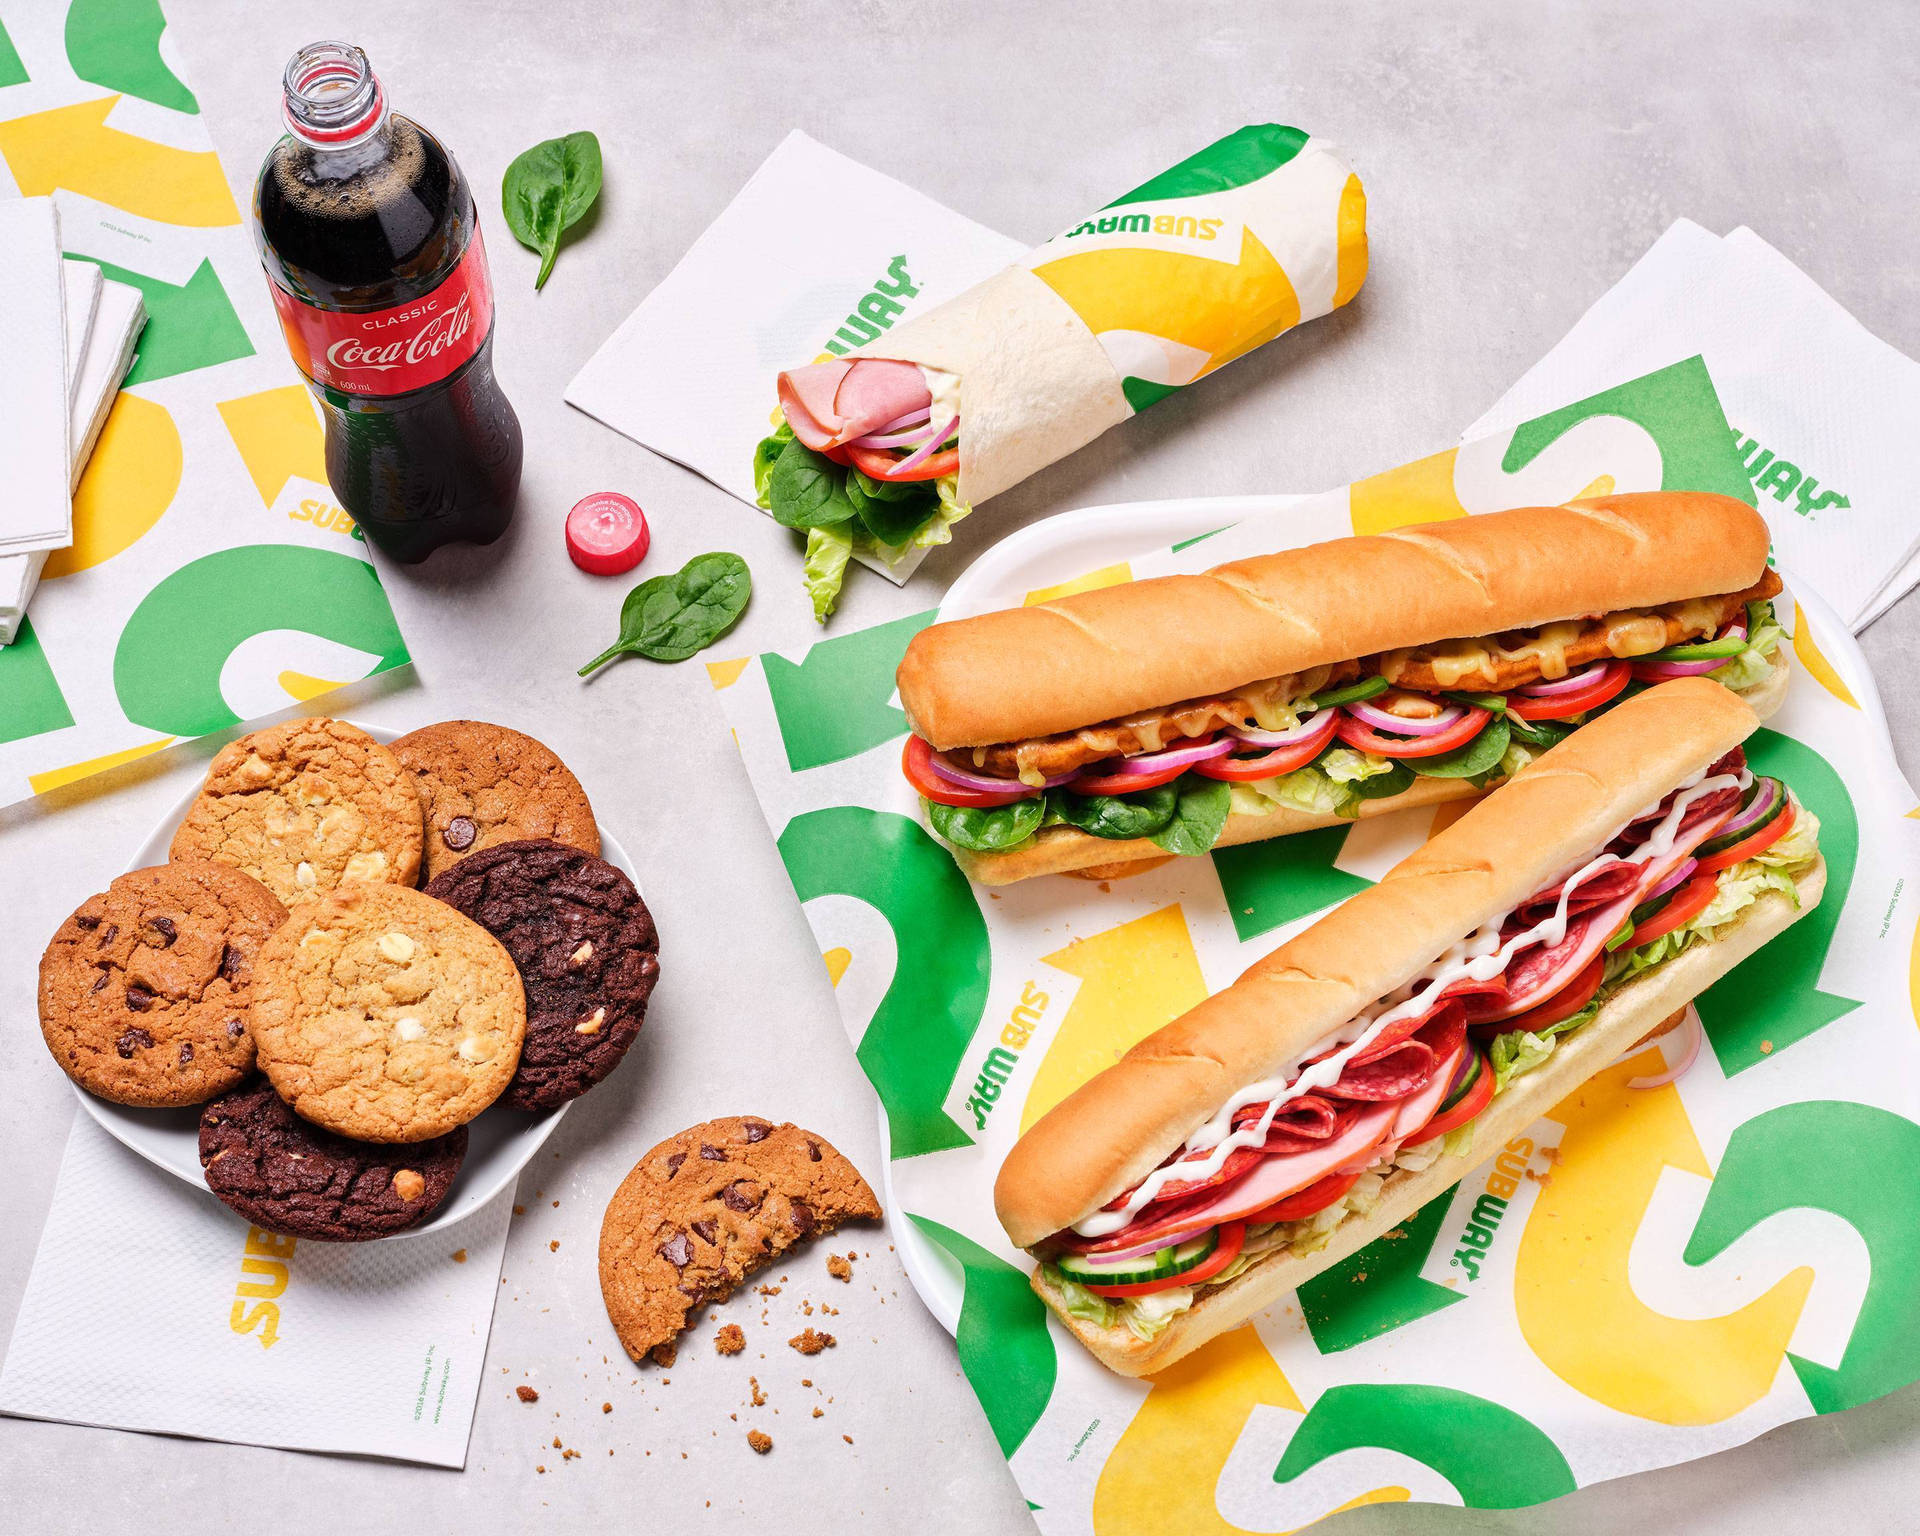 Subway Sandwiches And Cookies Wallpaper